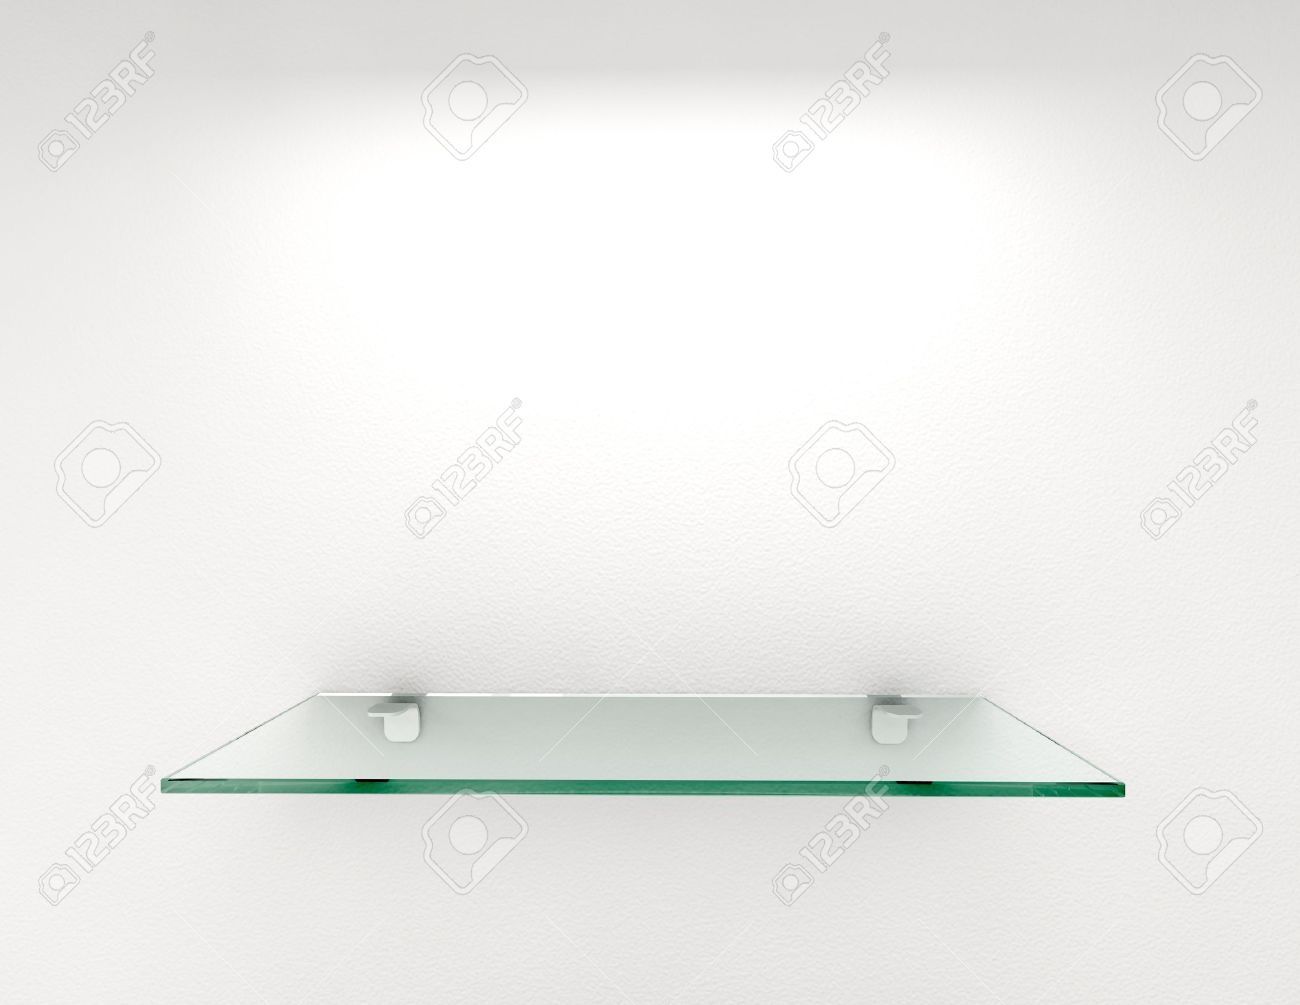 Floating Glass Shelf Kits Buy Decorative Glass Online The For Inside Free Floating Glass Shelves (View 11 of 12)